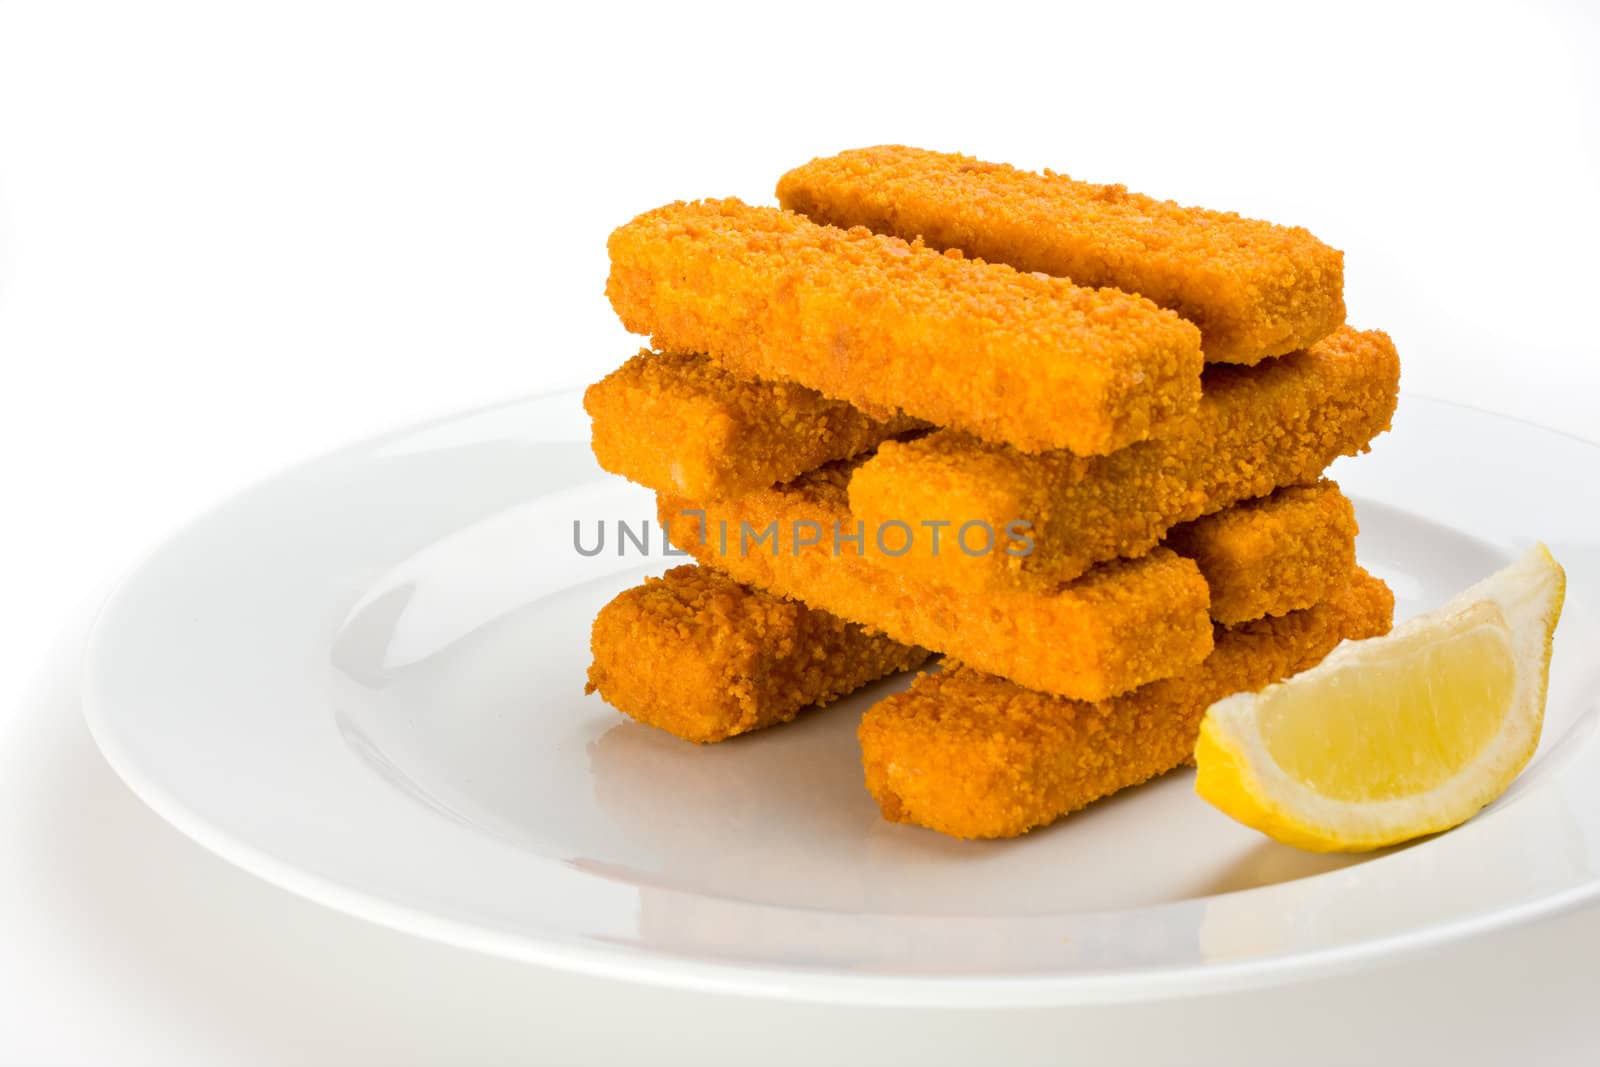 eight fish fingers on a white plate by bernjuer